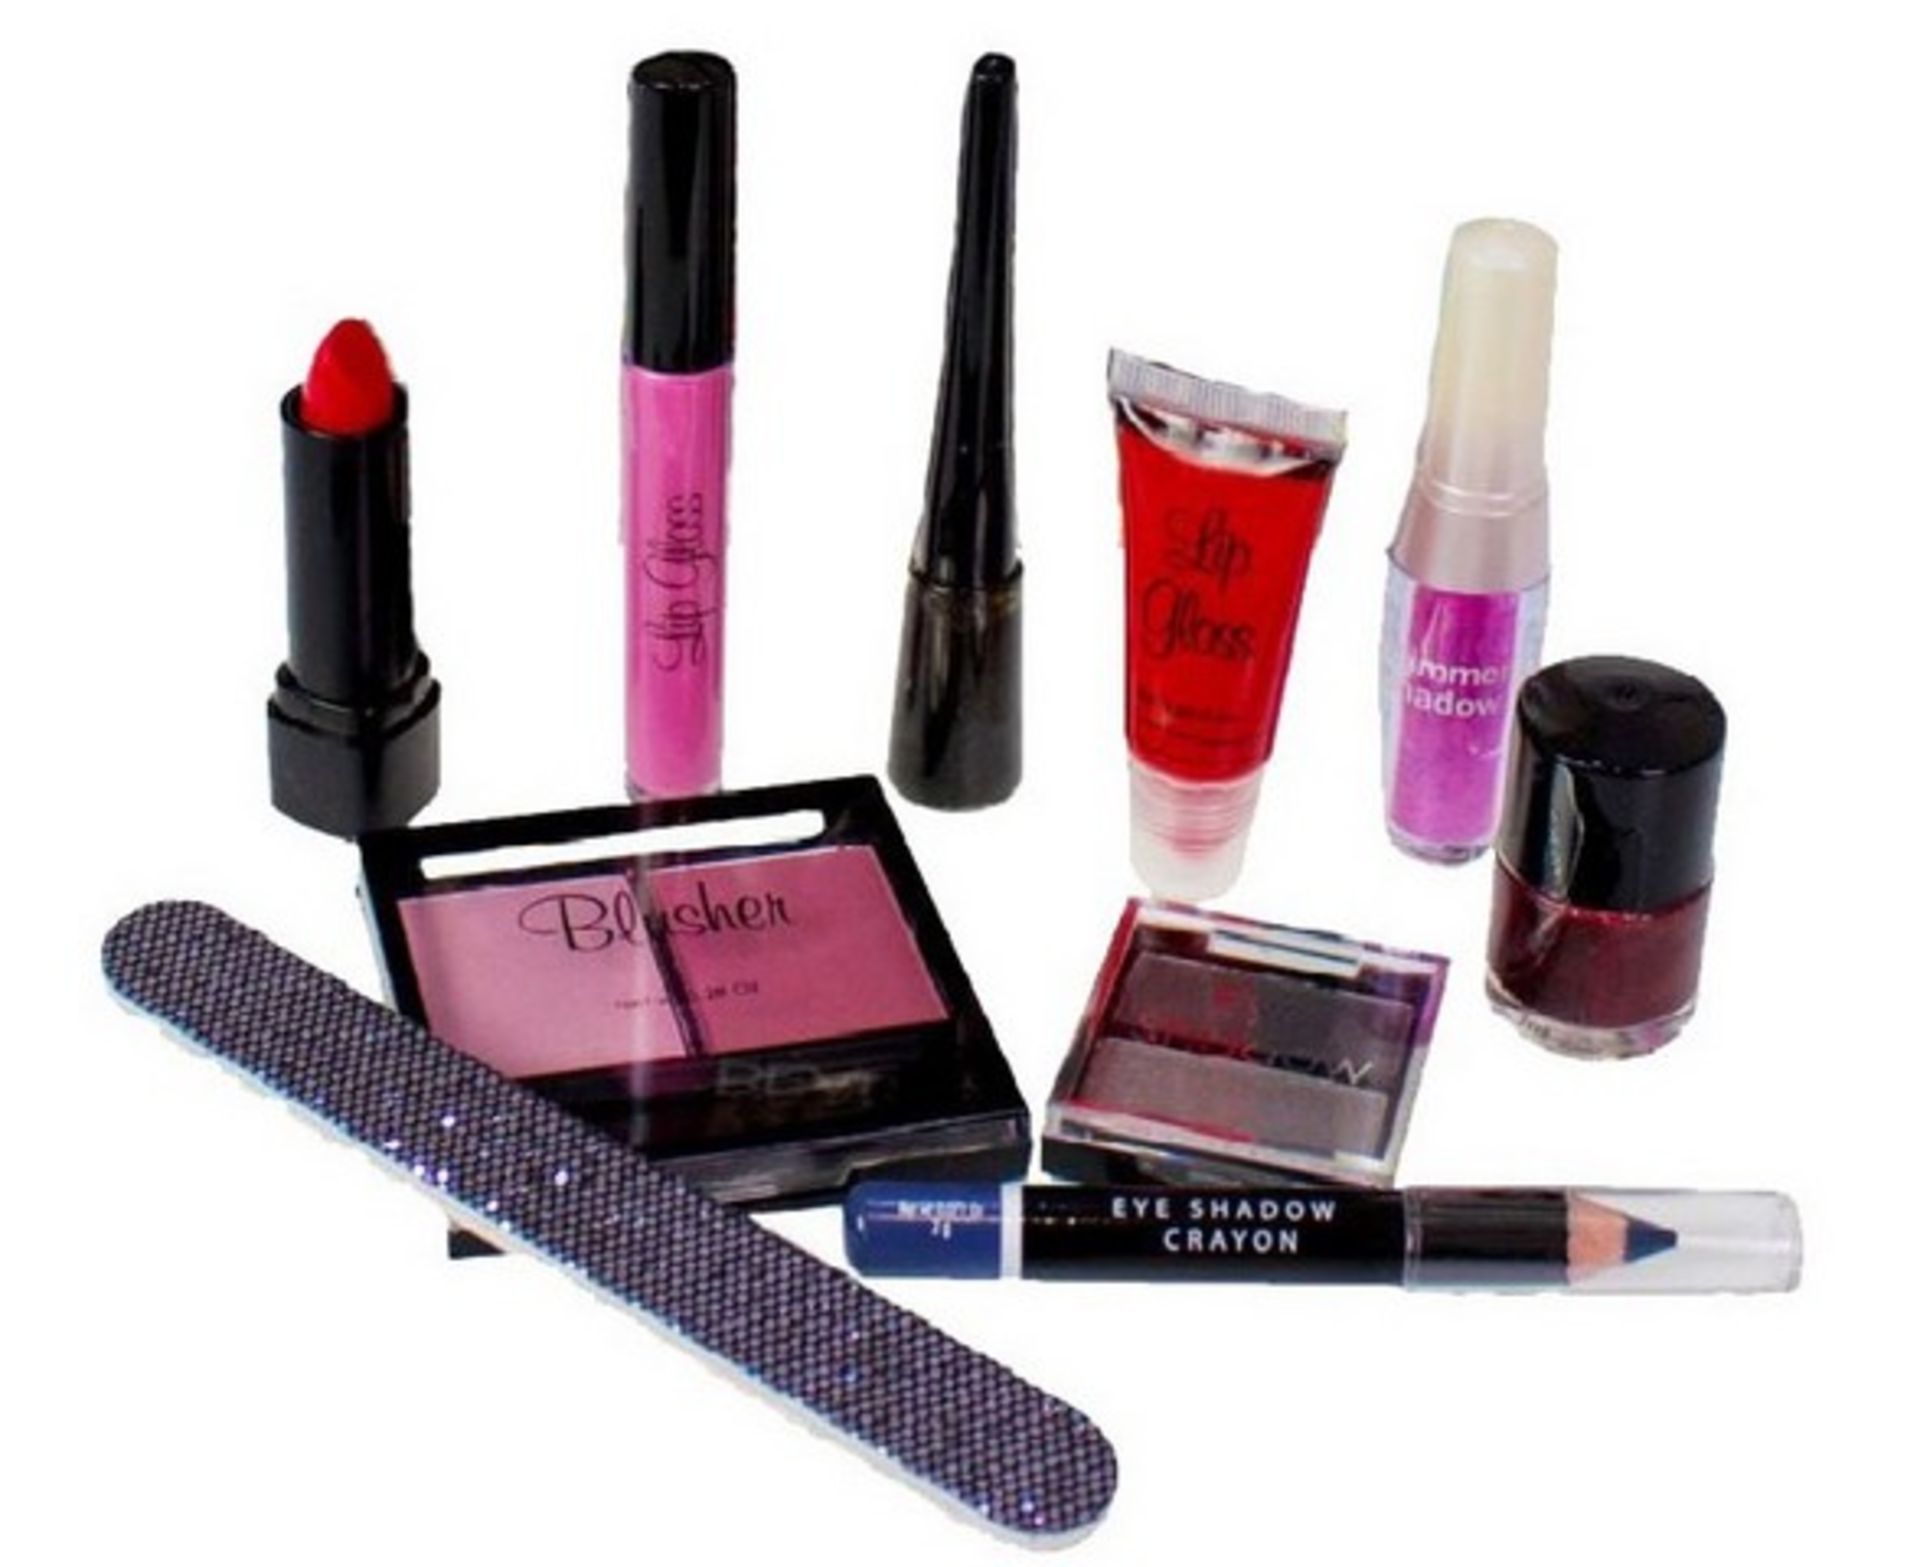 + VAT Brand New Ten Beauty Product Selection in Gift Bag (Contents vary)